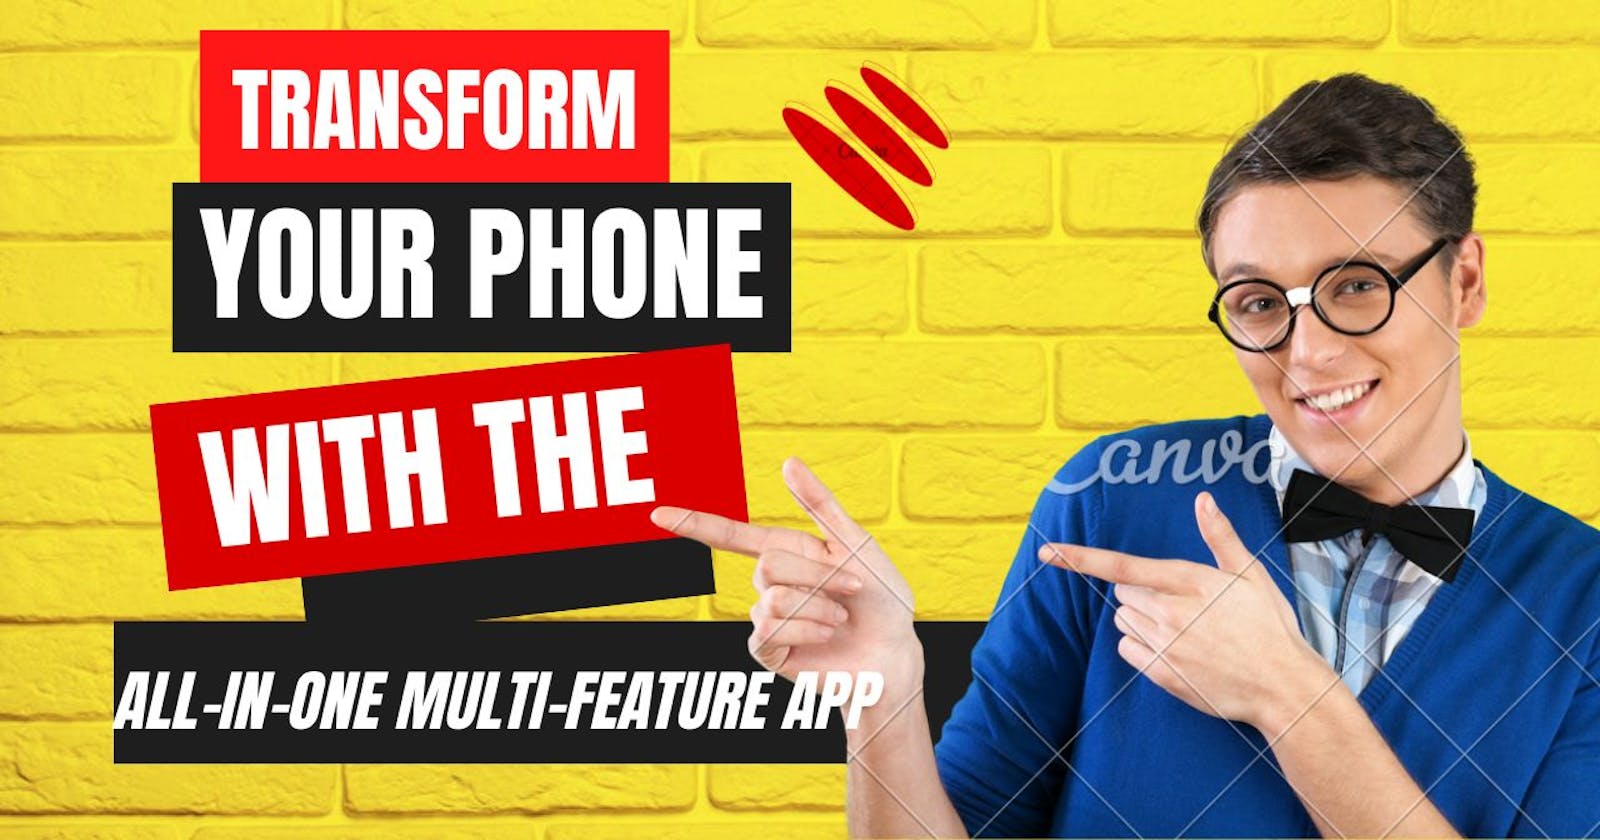 Transform Your Phone with the All-In-One Multi-Feature App